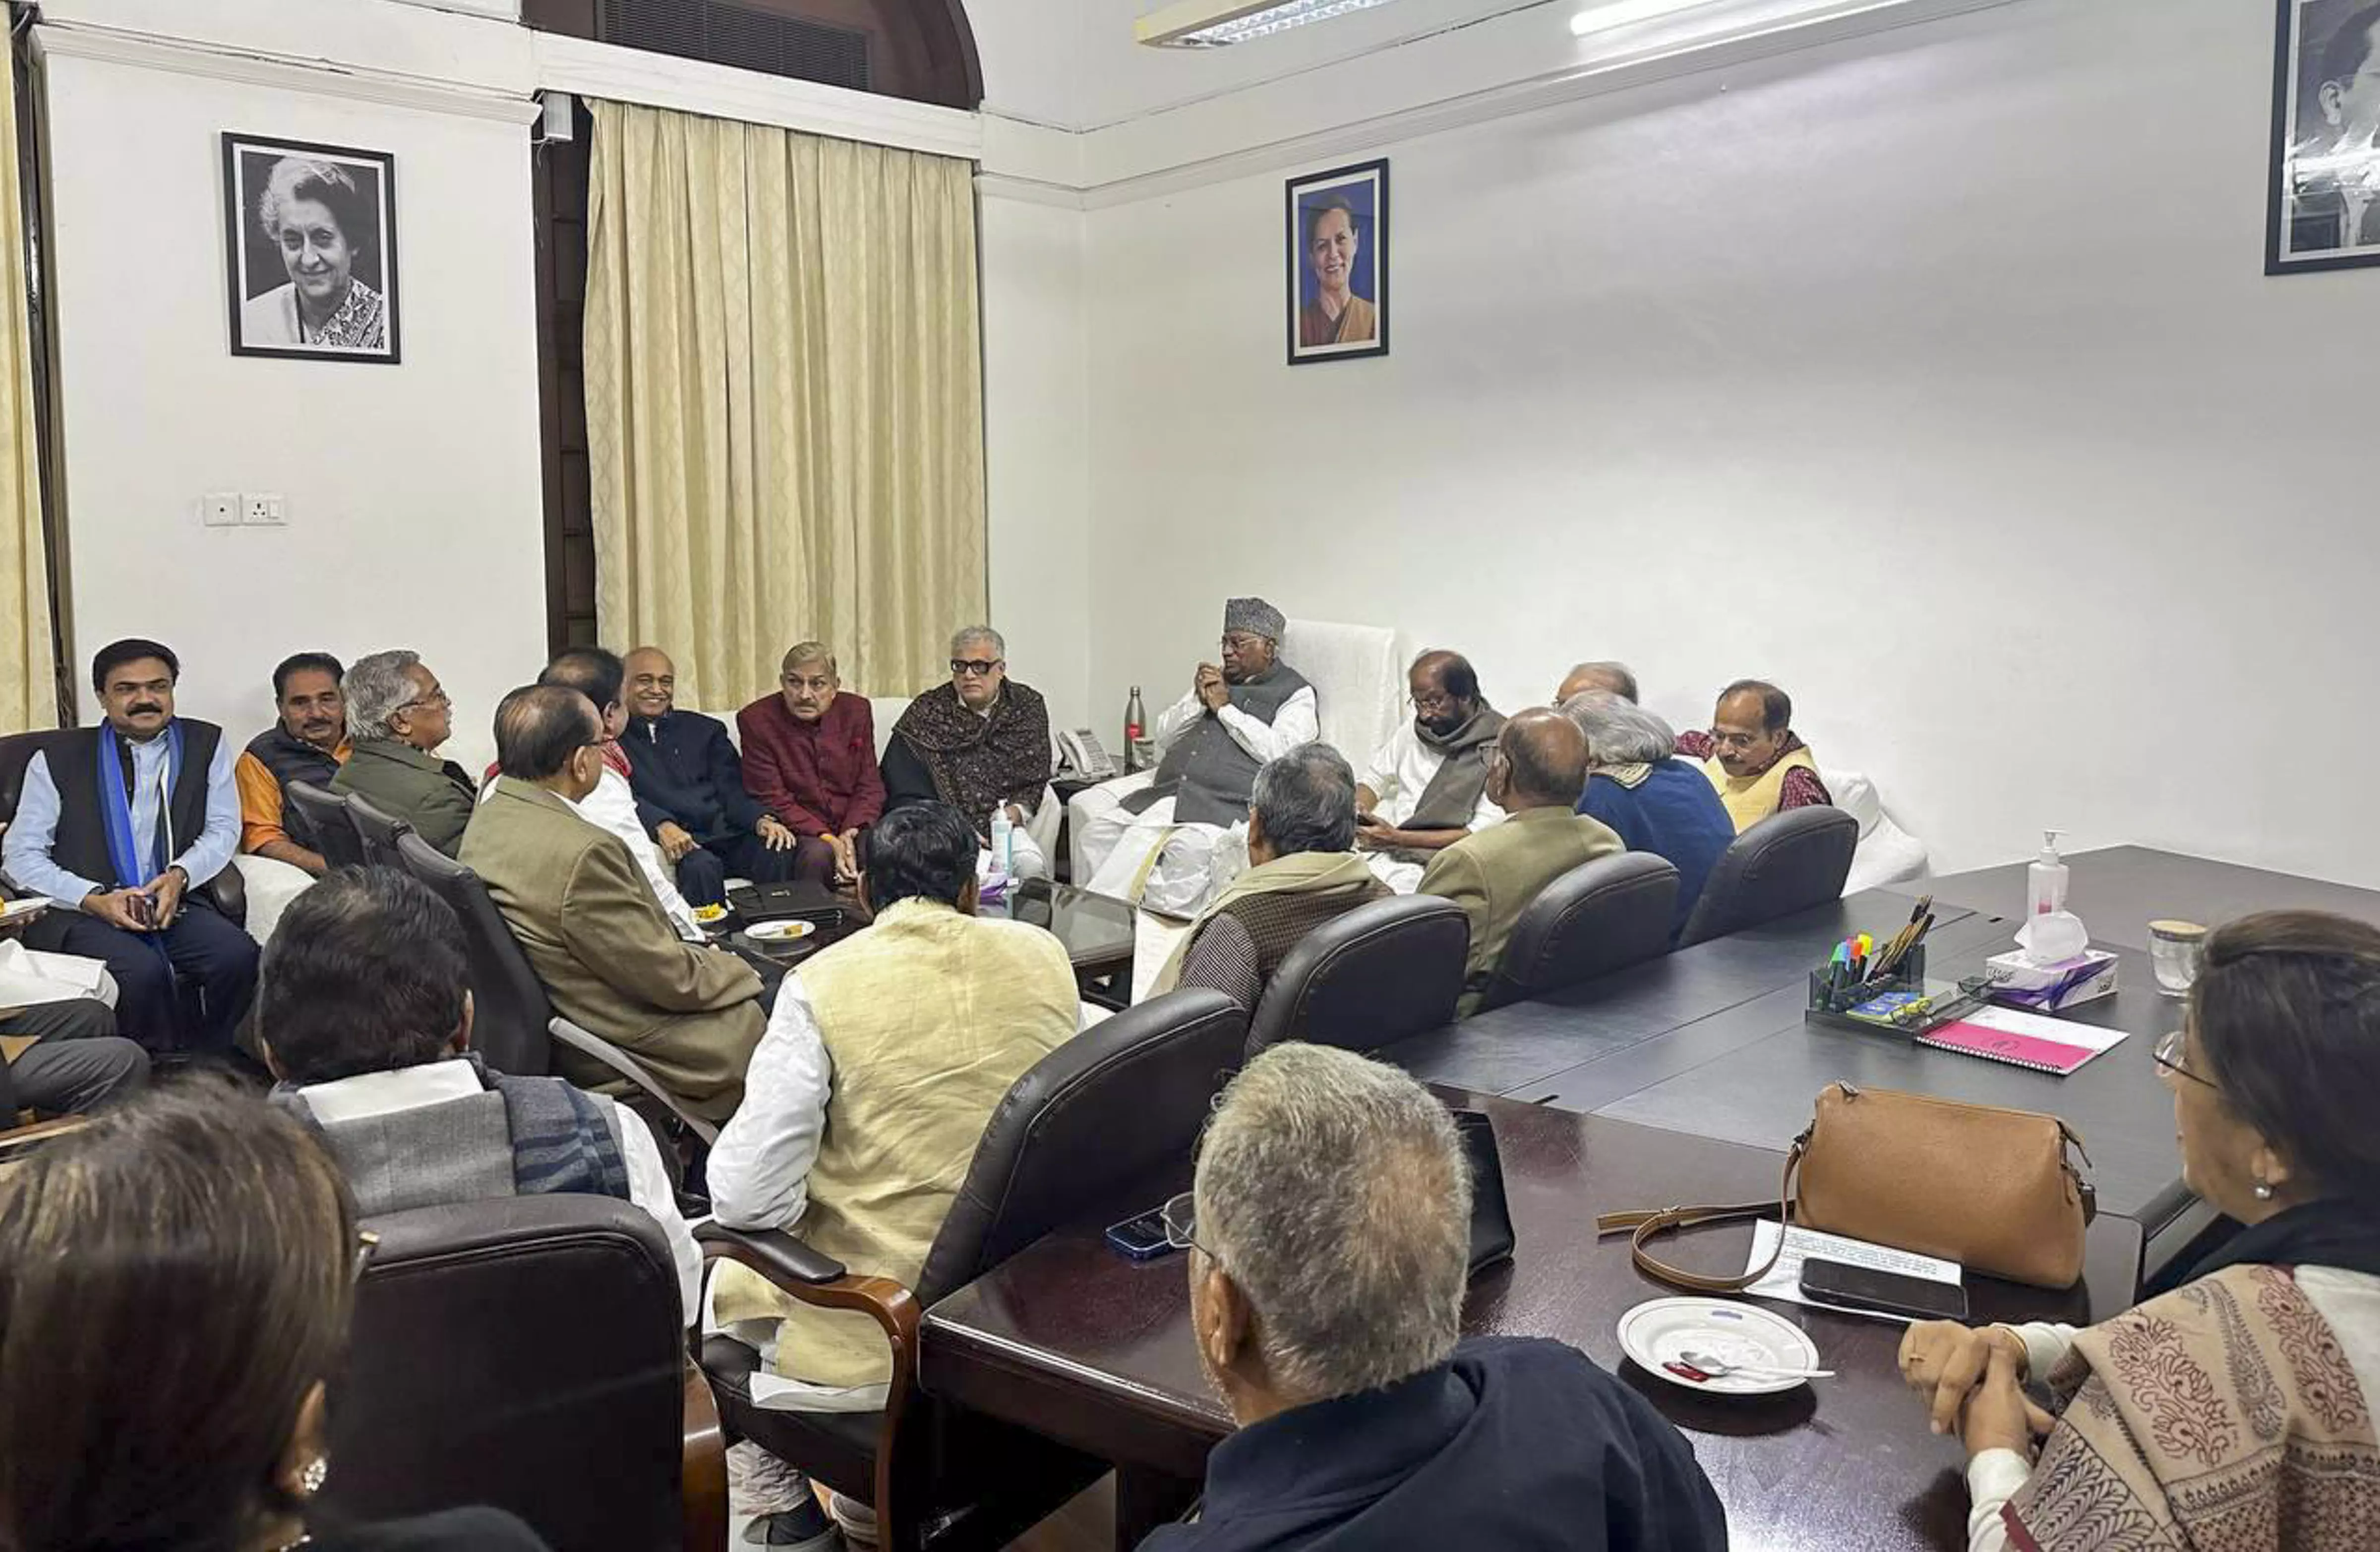 Mallikarjun Kharge and opposition leaders in discussion in his chambers